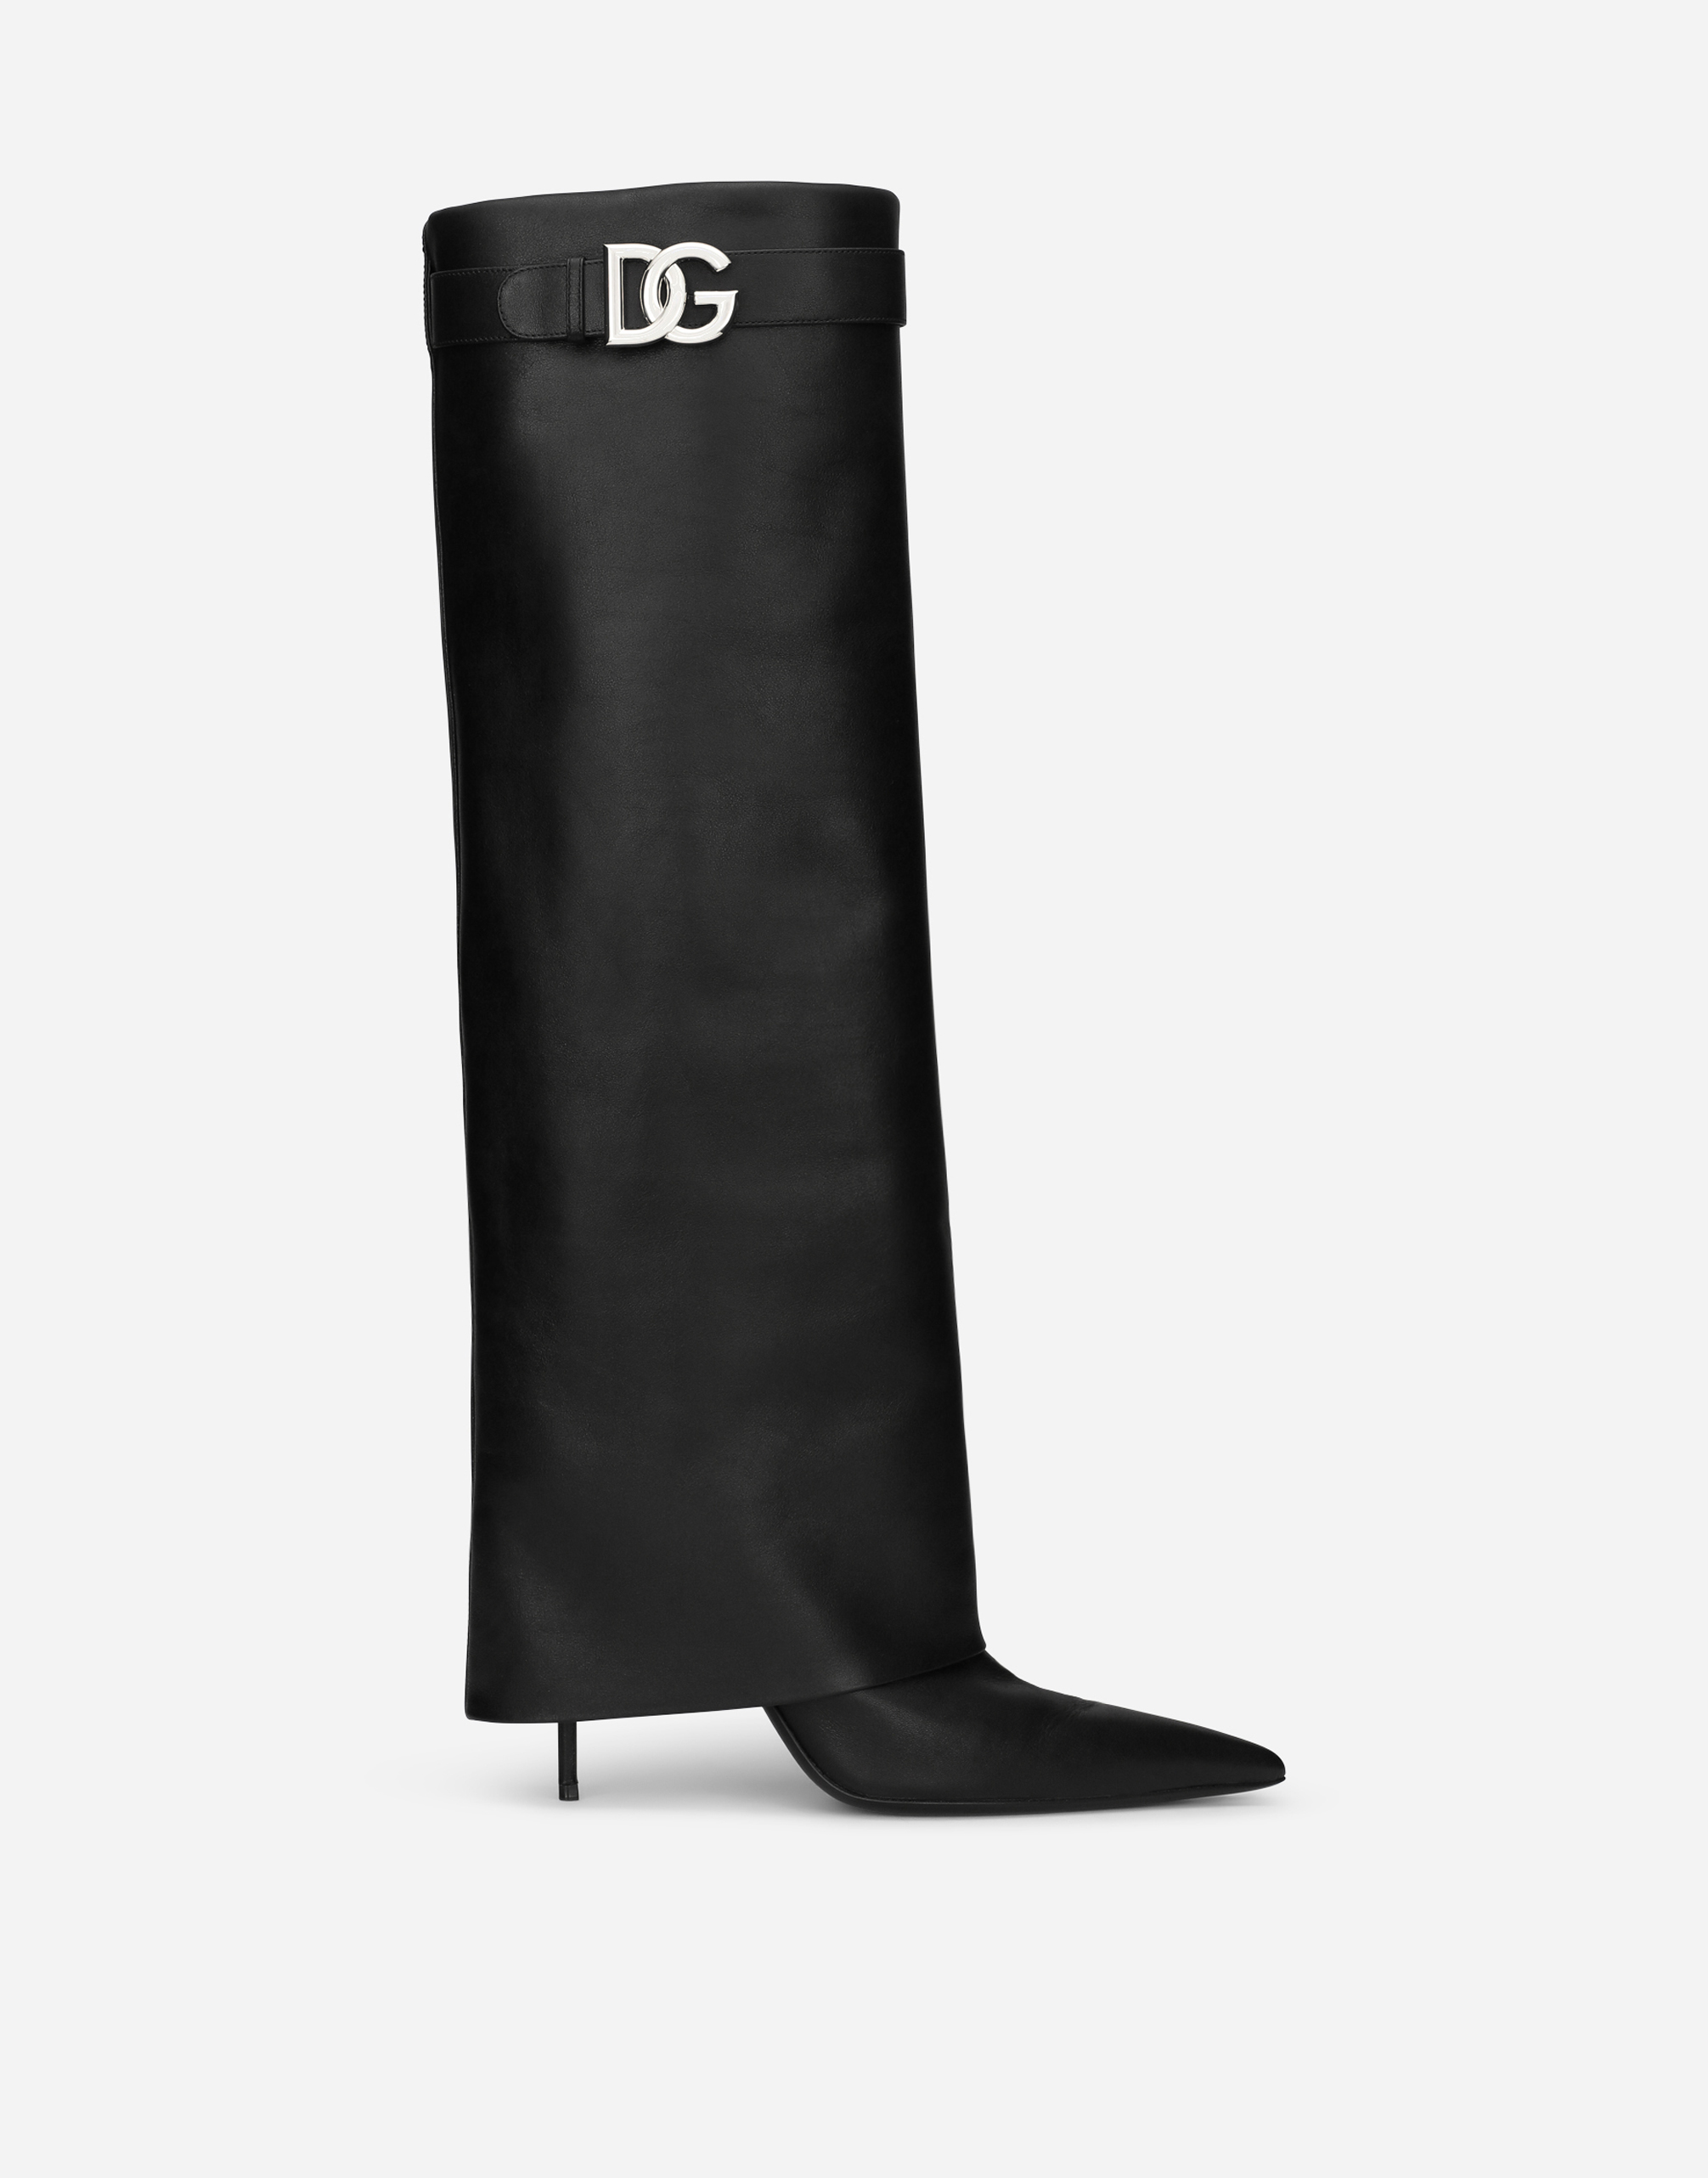 Nappa leather boots with DG logo in Black